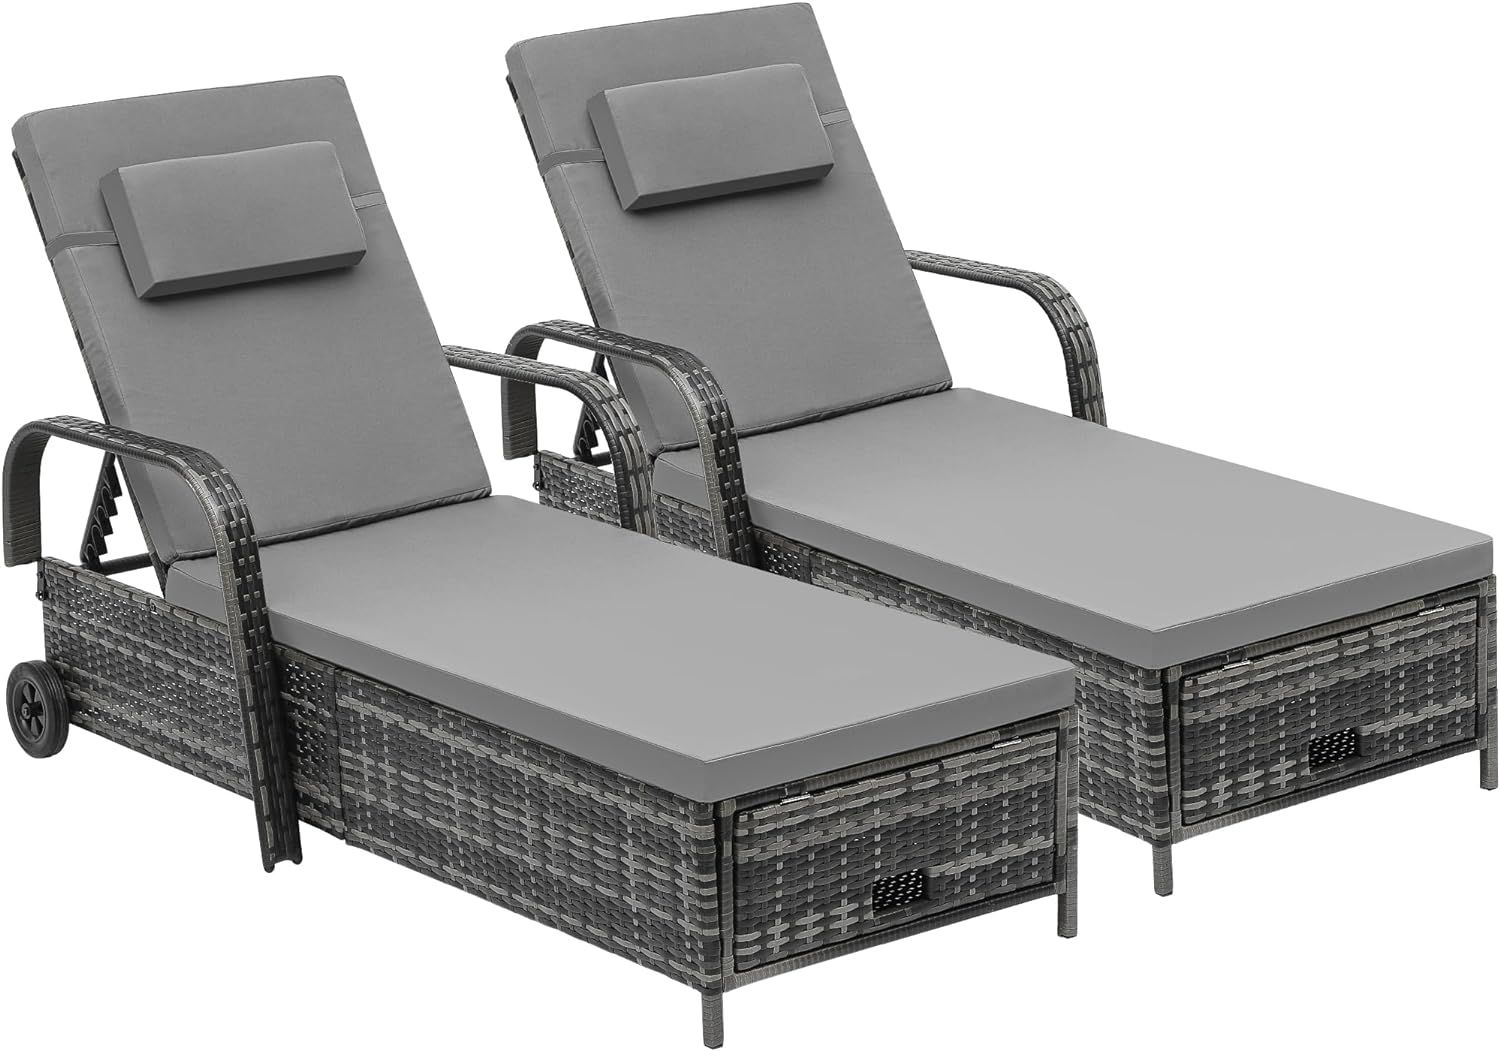 YITAHOME Outdoor Wicker Chaise Lounge Chair Set of 2 w/Storage, Rattan Patio Pool Lounger with Ad... | Amazon (US)